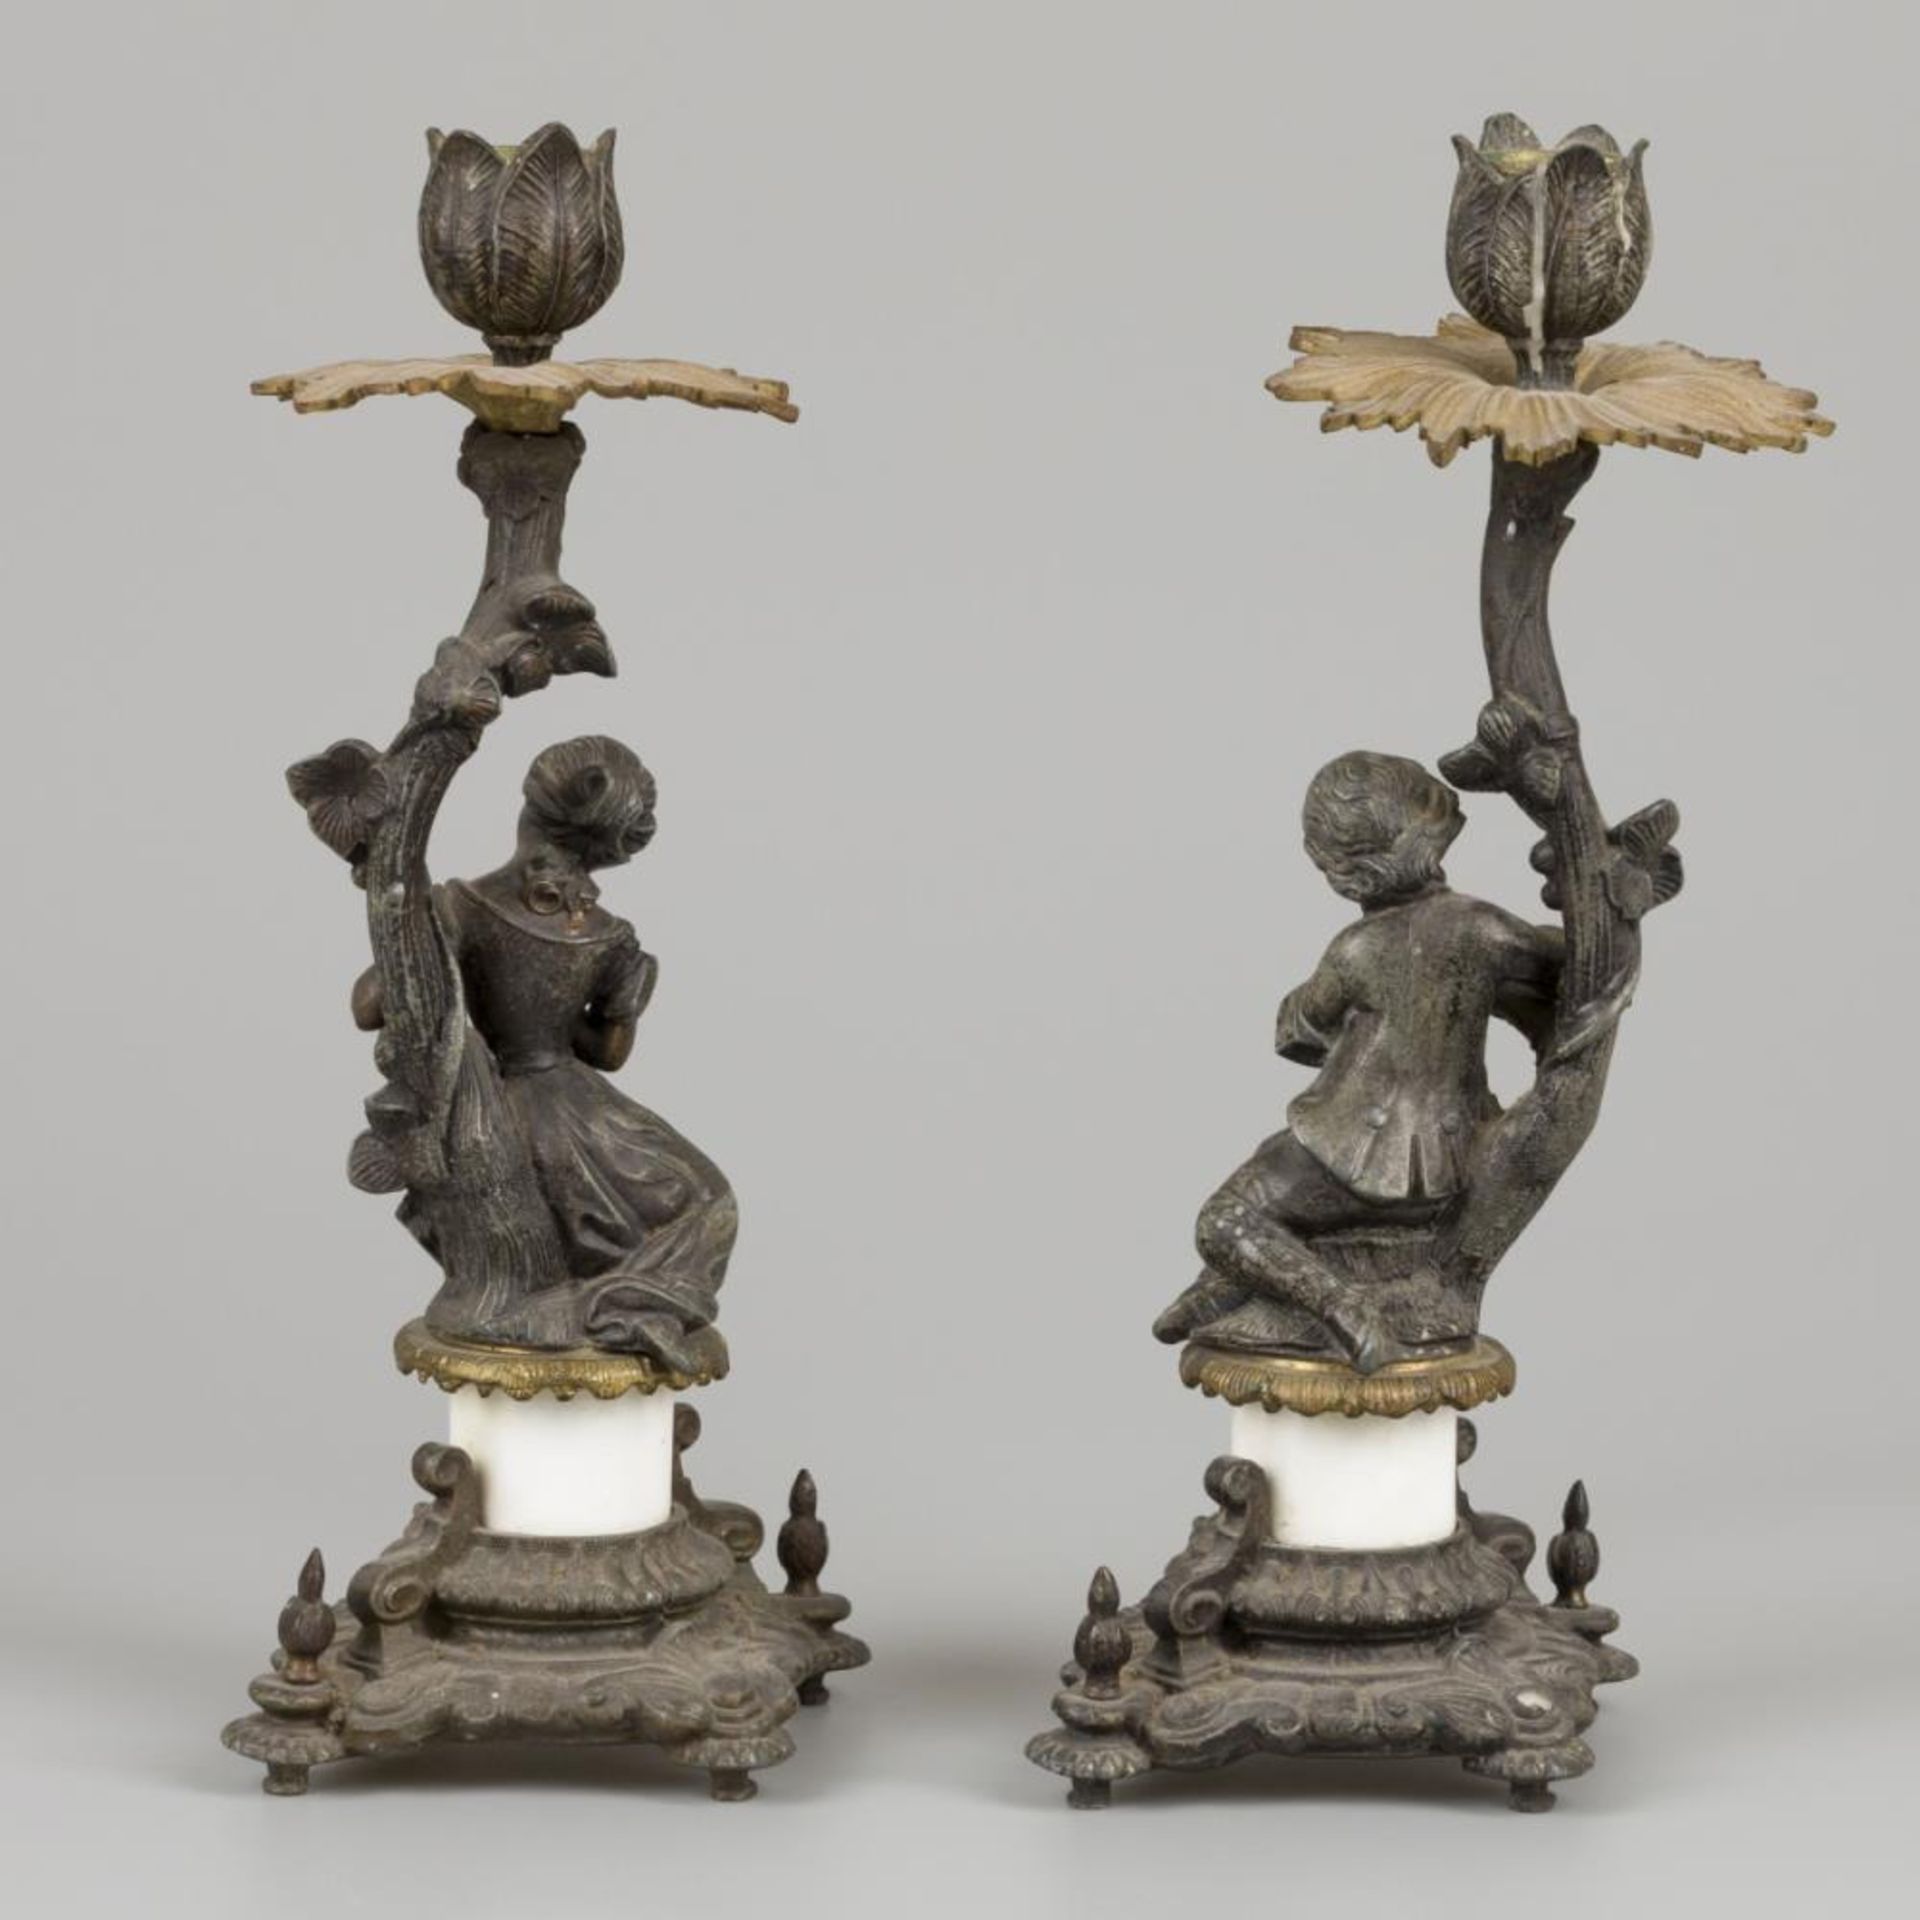 A set of (2) bronze candles, France, late 19th century. - Image 4 of 5